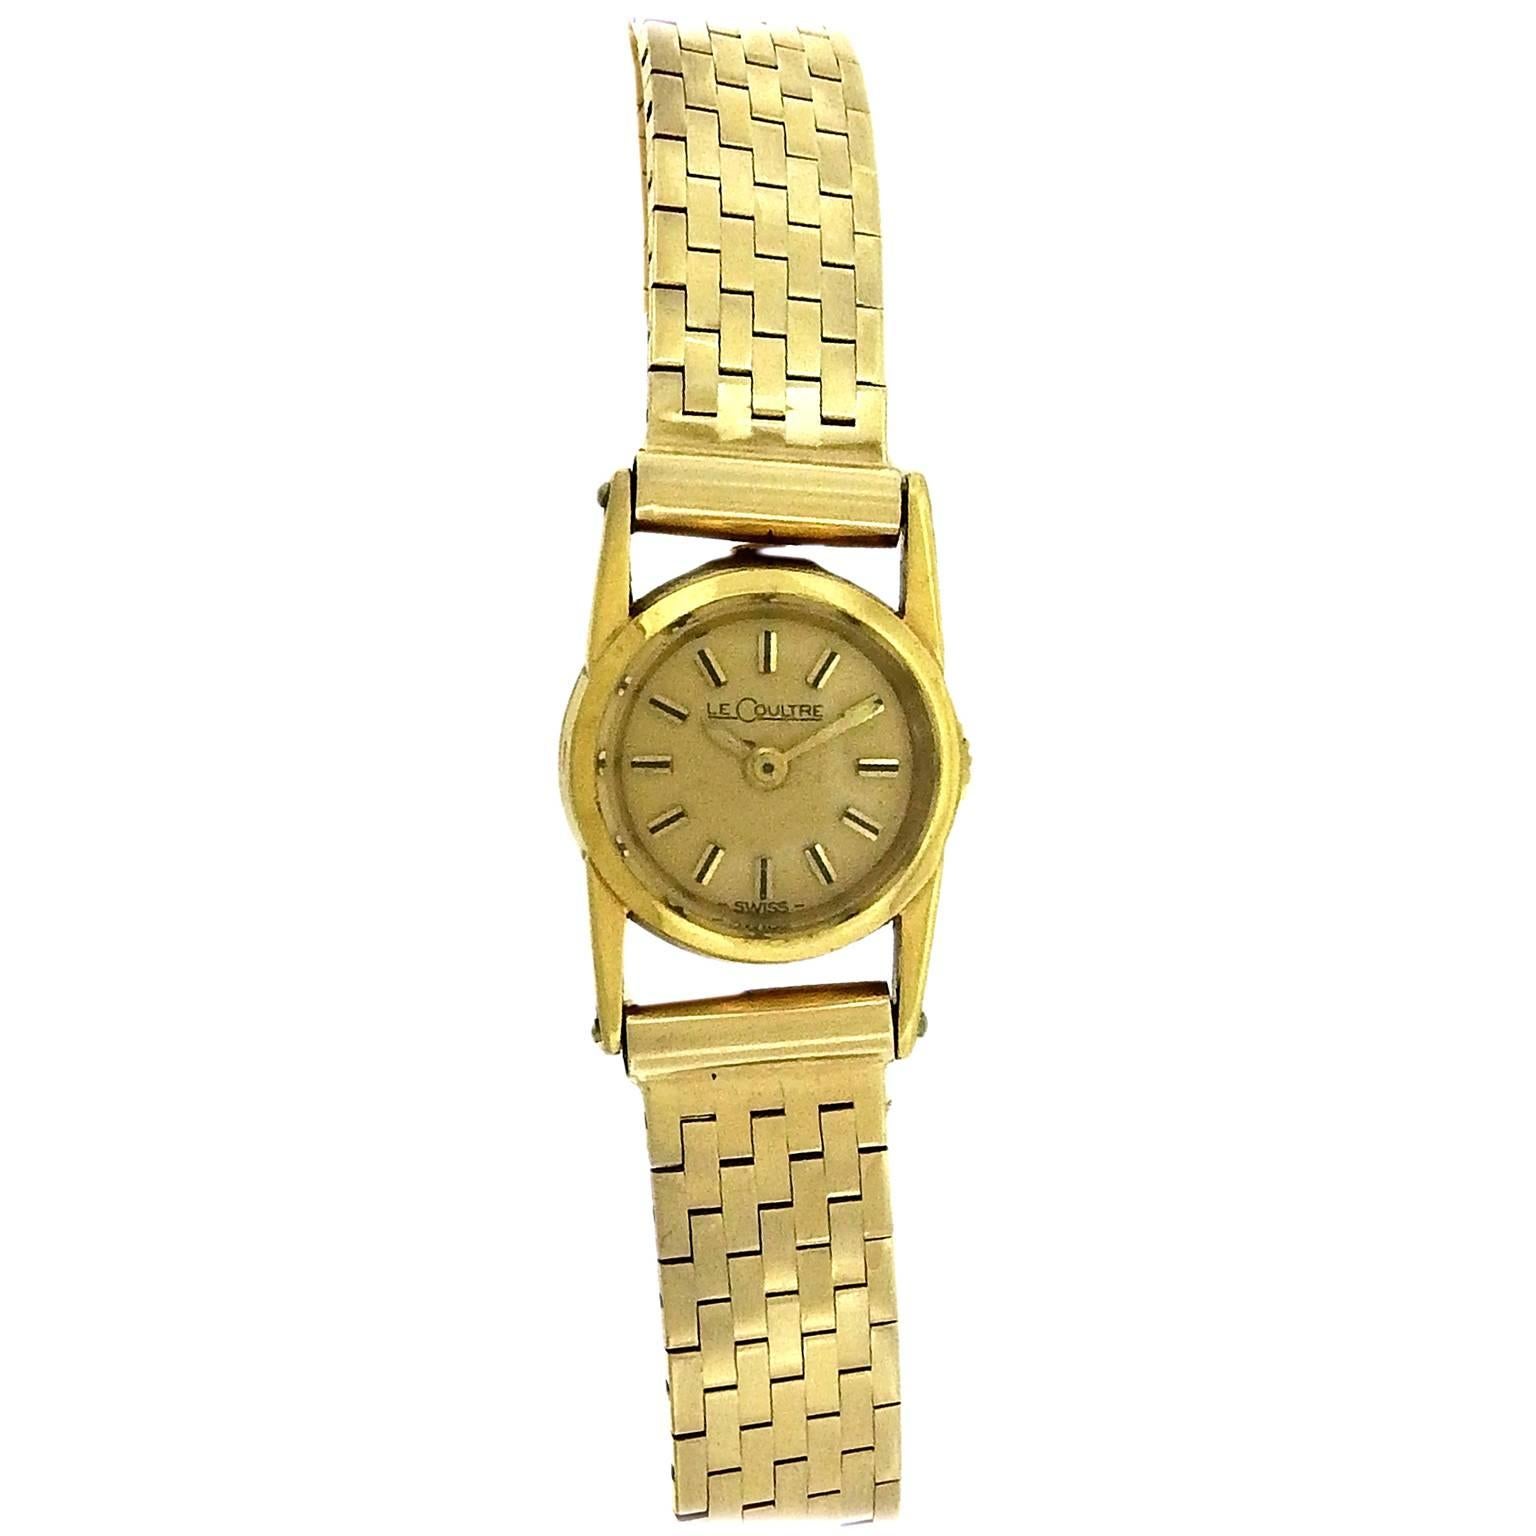 18K yellow gold Jaeger LeCoultre from the 1940's is one of the iconic cocktail watches of the period, this one with a Tiffany hallmarked 14K yellow gold brick pattern bracelet. The 14mm case has extended tapered lugs, and back winder.  The champagne